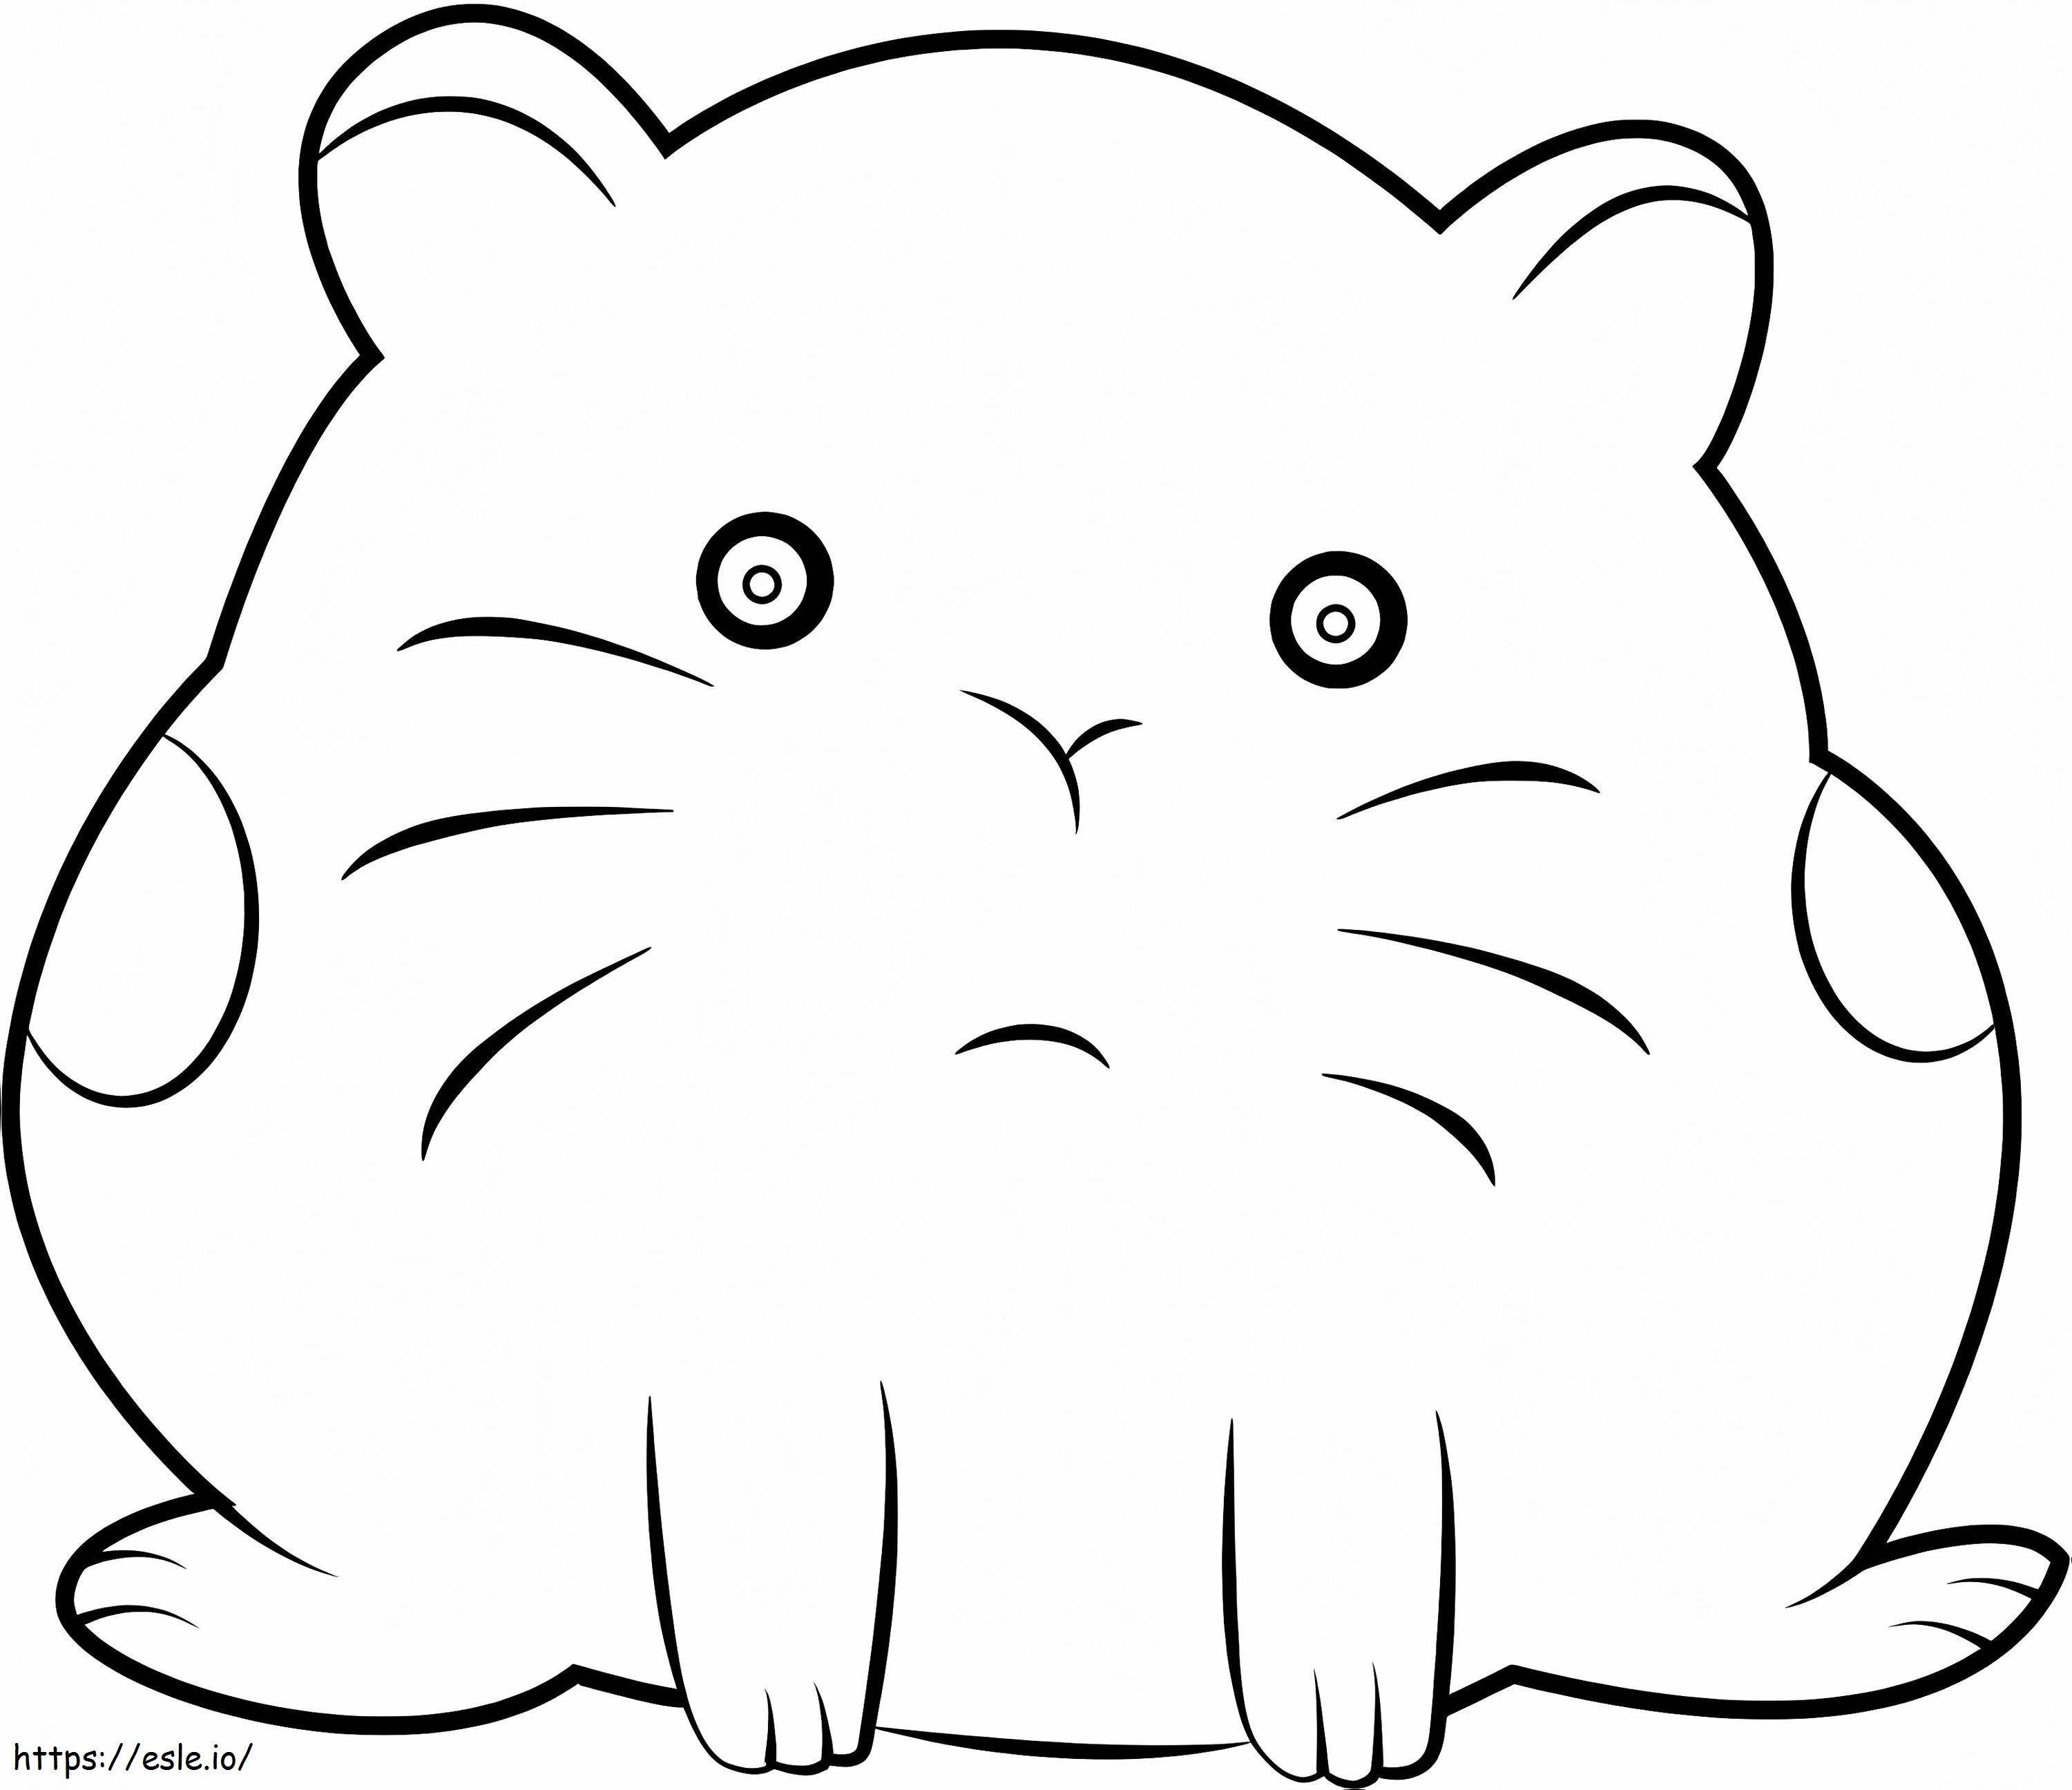 Cute Hamster Sitting coloring page